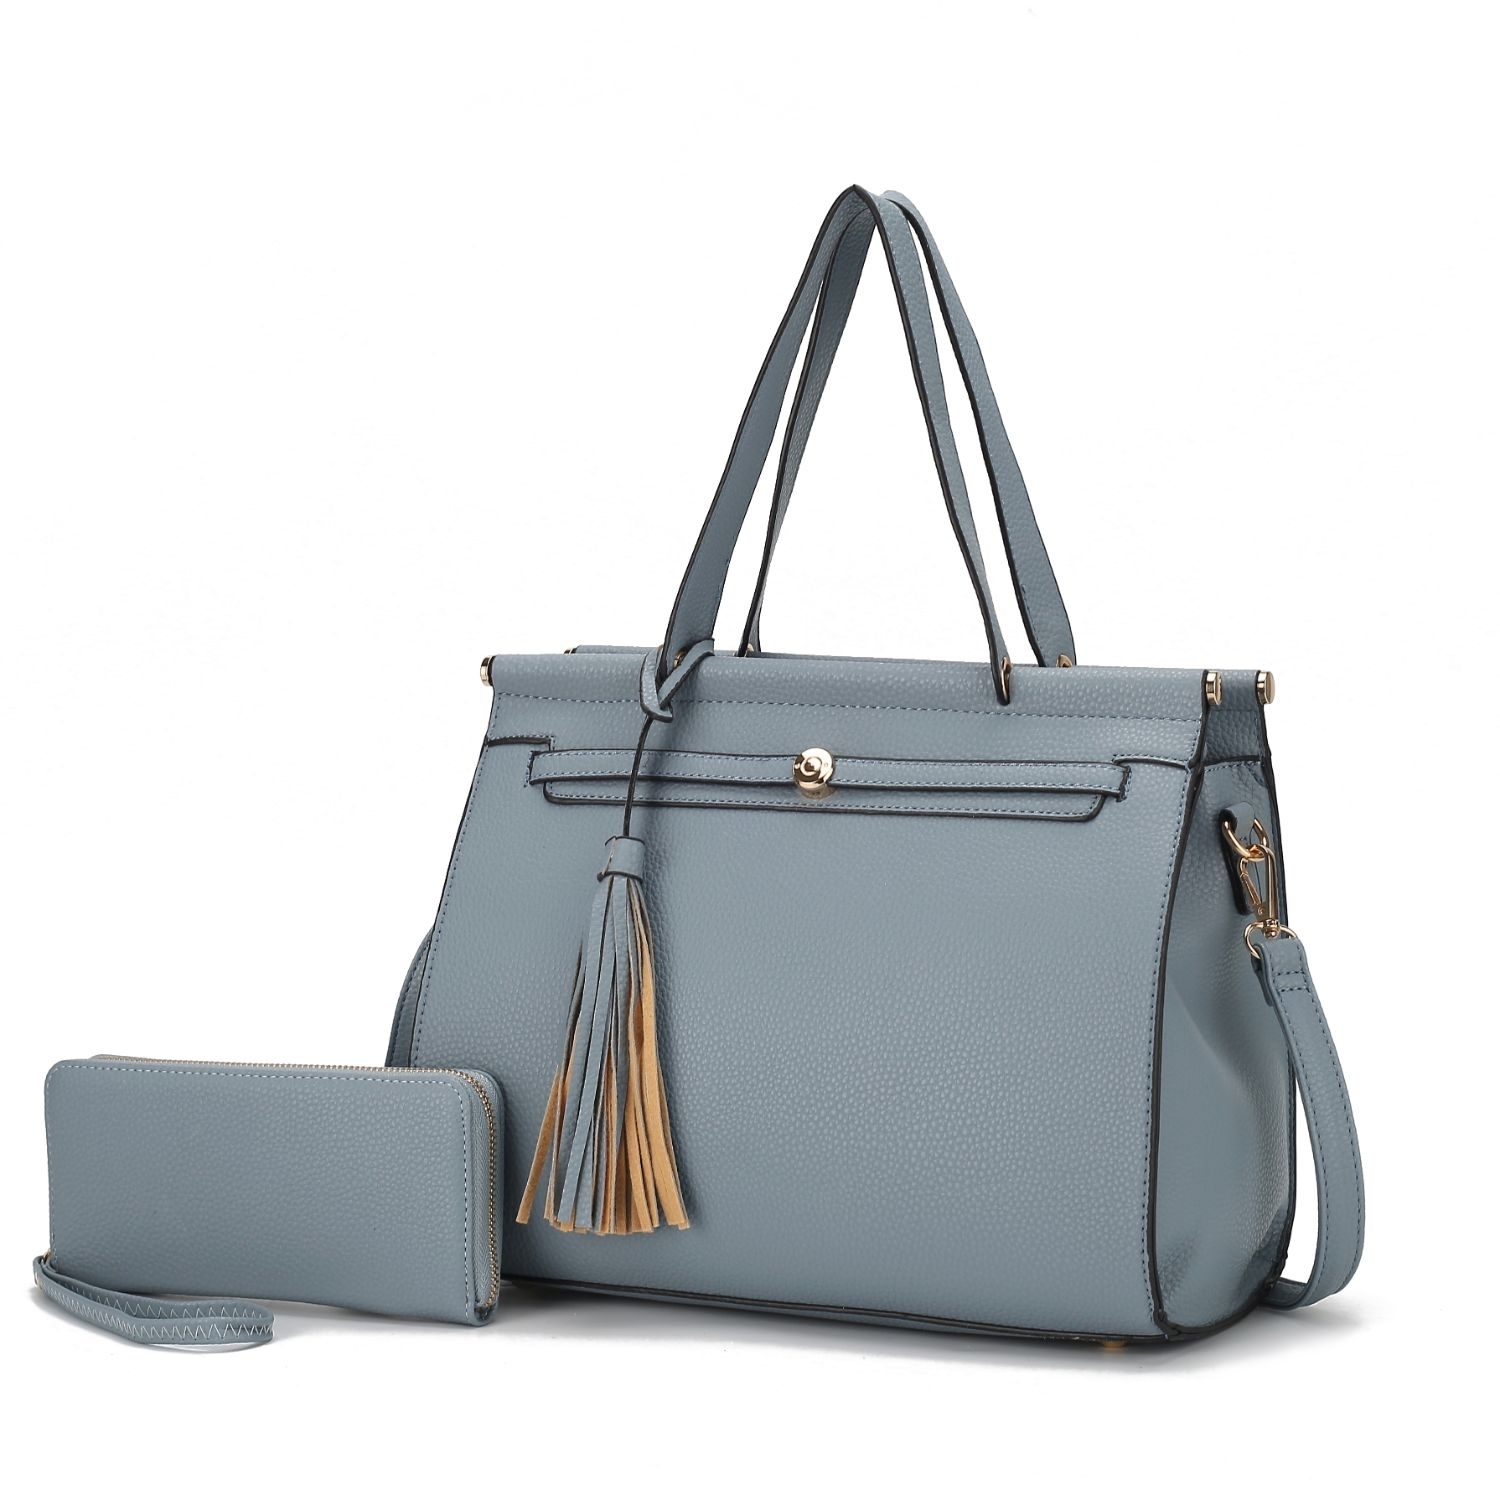 MKF Collection Shelby Vegan Leather Women's Satchel Bag By Mia K With Wallet -2 Pieces - Denim